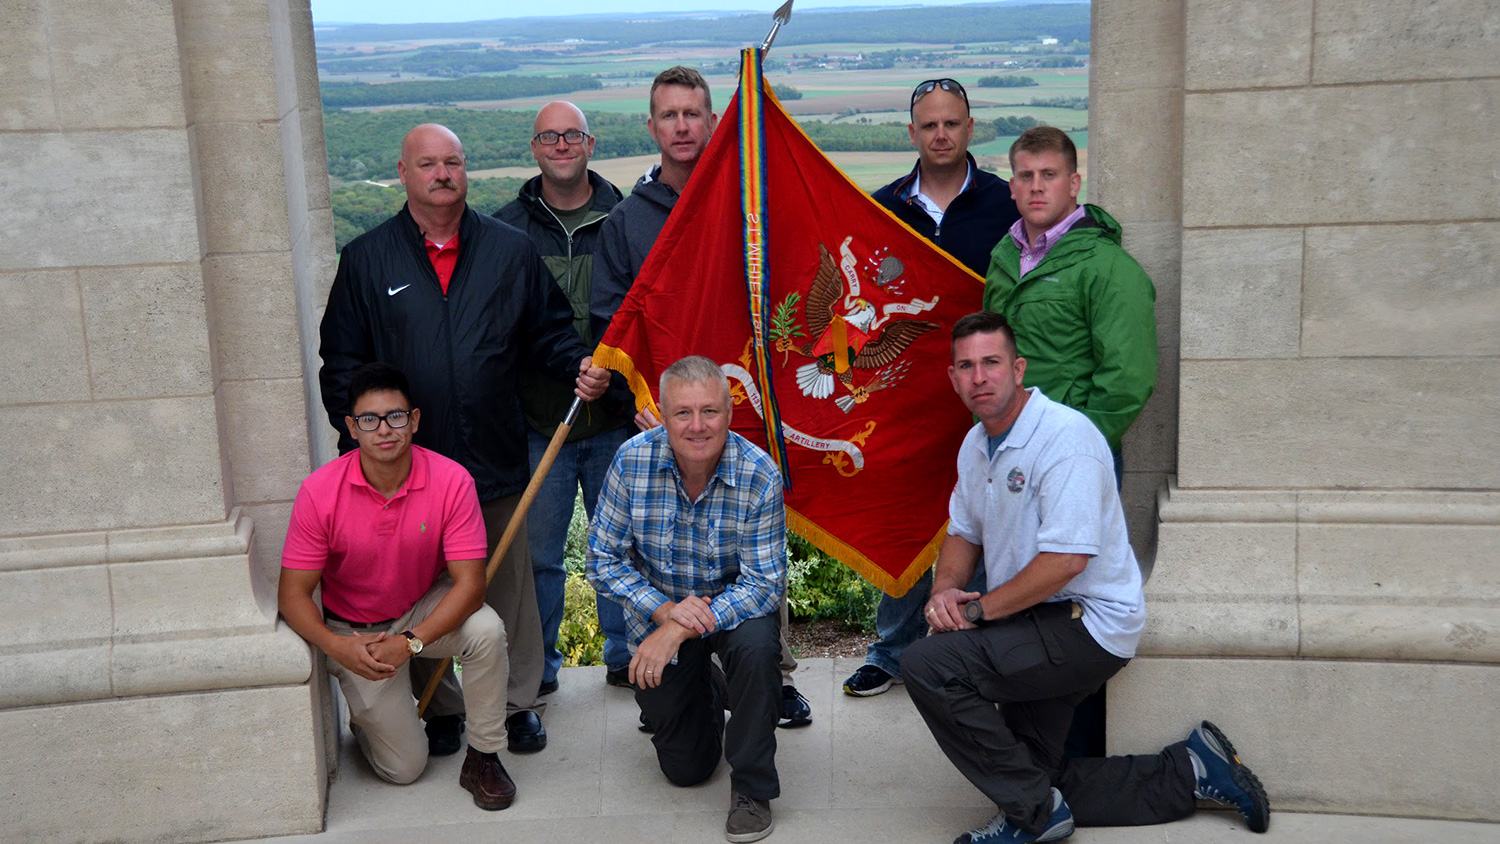 While en route to a ceremony commemorating the 1918 Meuse-Argonne offensive in northeastern France, NC State Army Reserve members stopped at the Montsec American Monument in France, which honors the 1918 Battle of Saint-Mihiel in which their unit fought during WWI. They are holding their 113th Field Artillery Regiment flag.